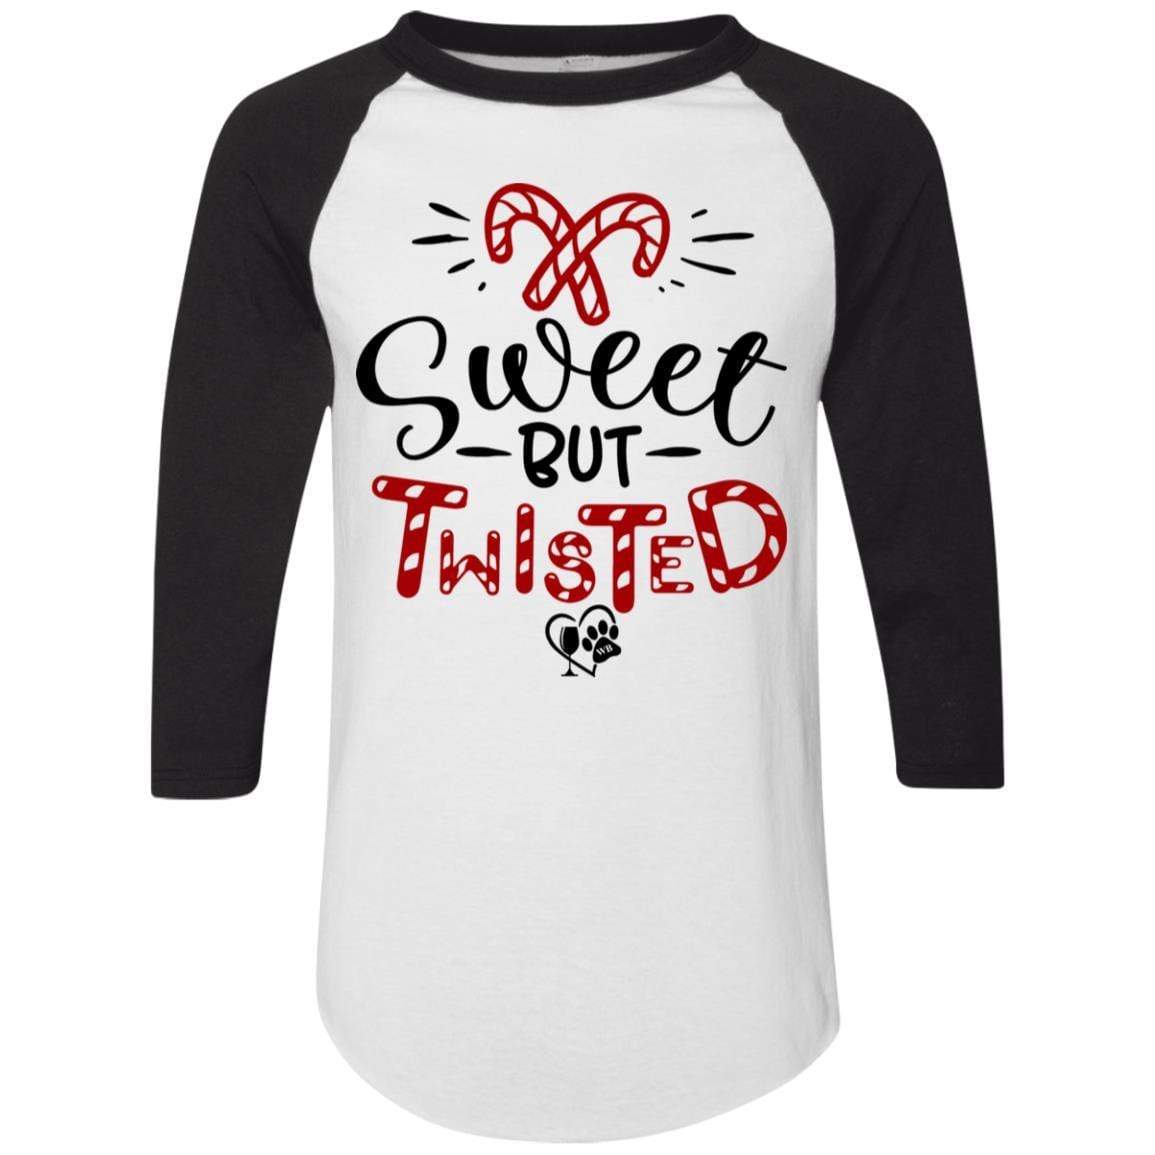 T-Shirts White/Black / S WineyBitches.Co "Sweet But Twisted" Holiday Colorblock Raglan Jersey WineyBitchesCo